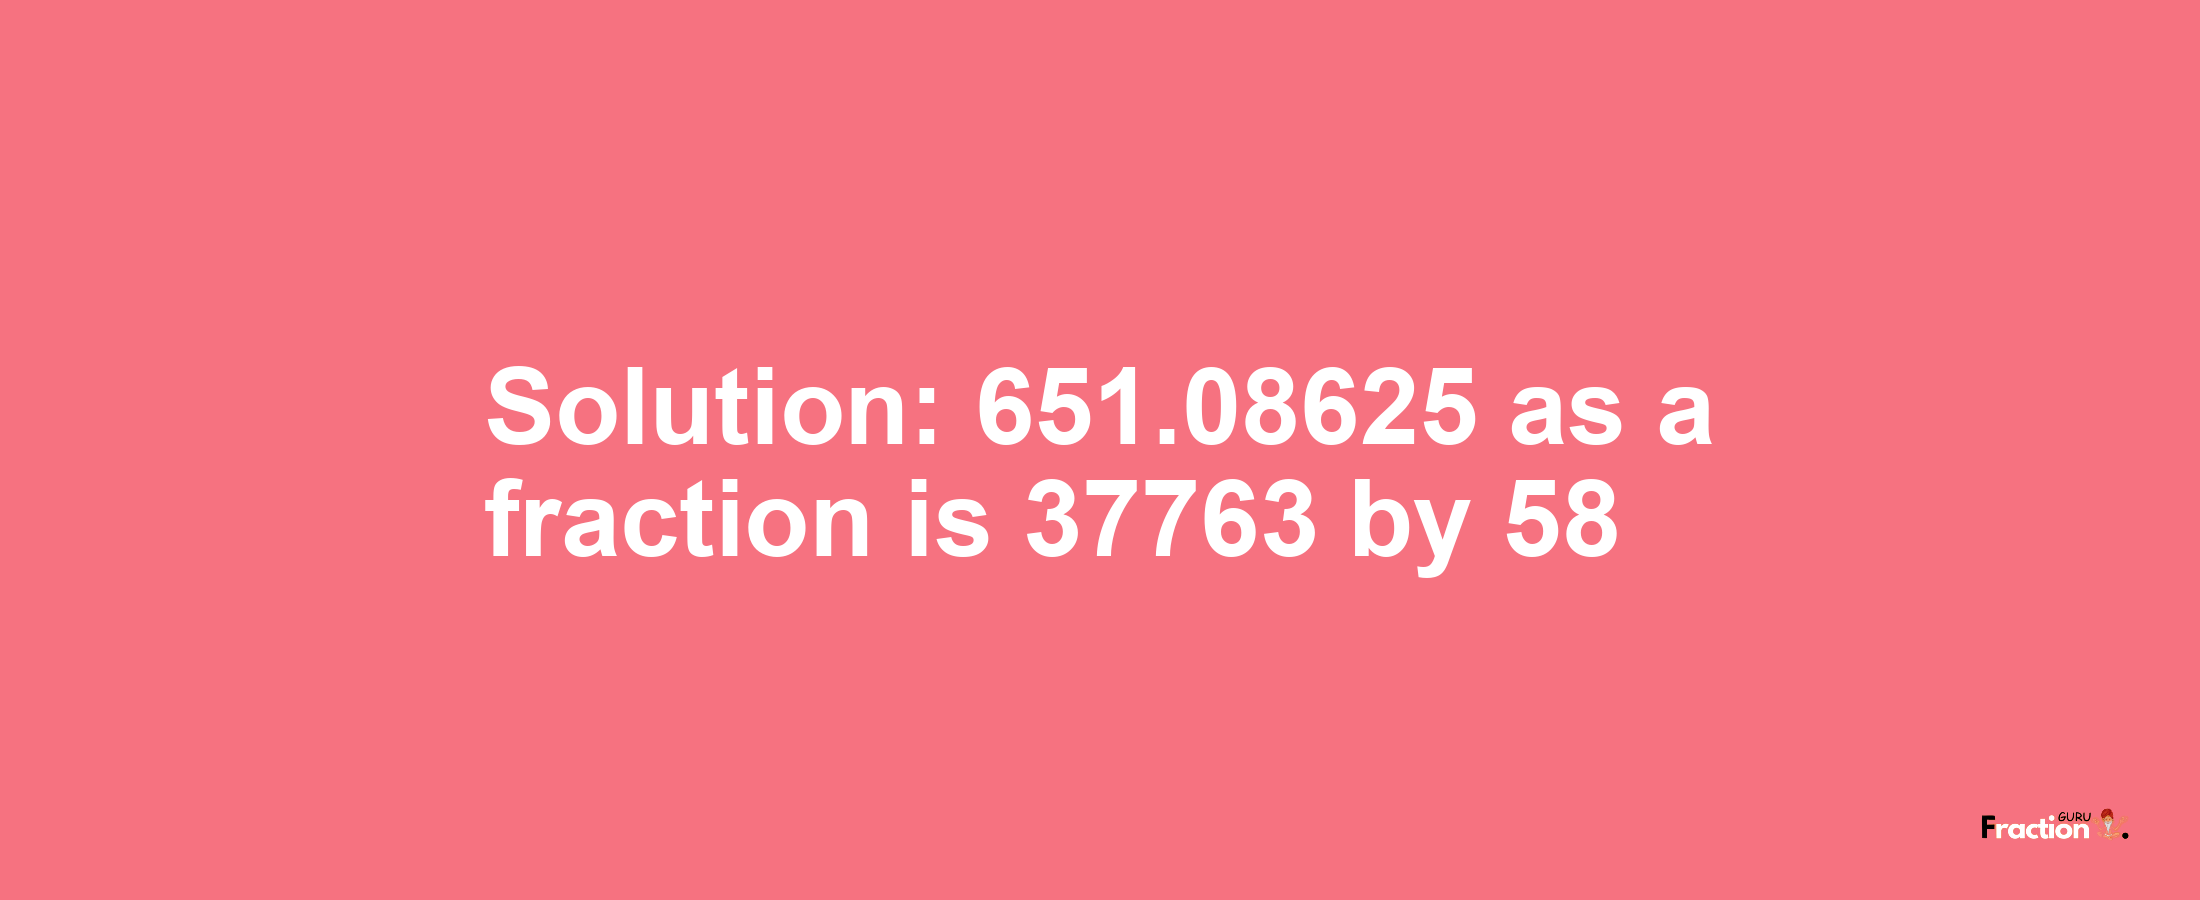 Solution:651.08625 as a fraction is 37763/58